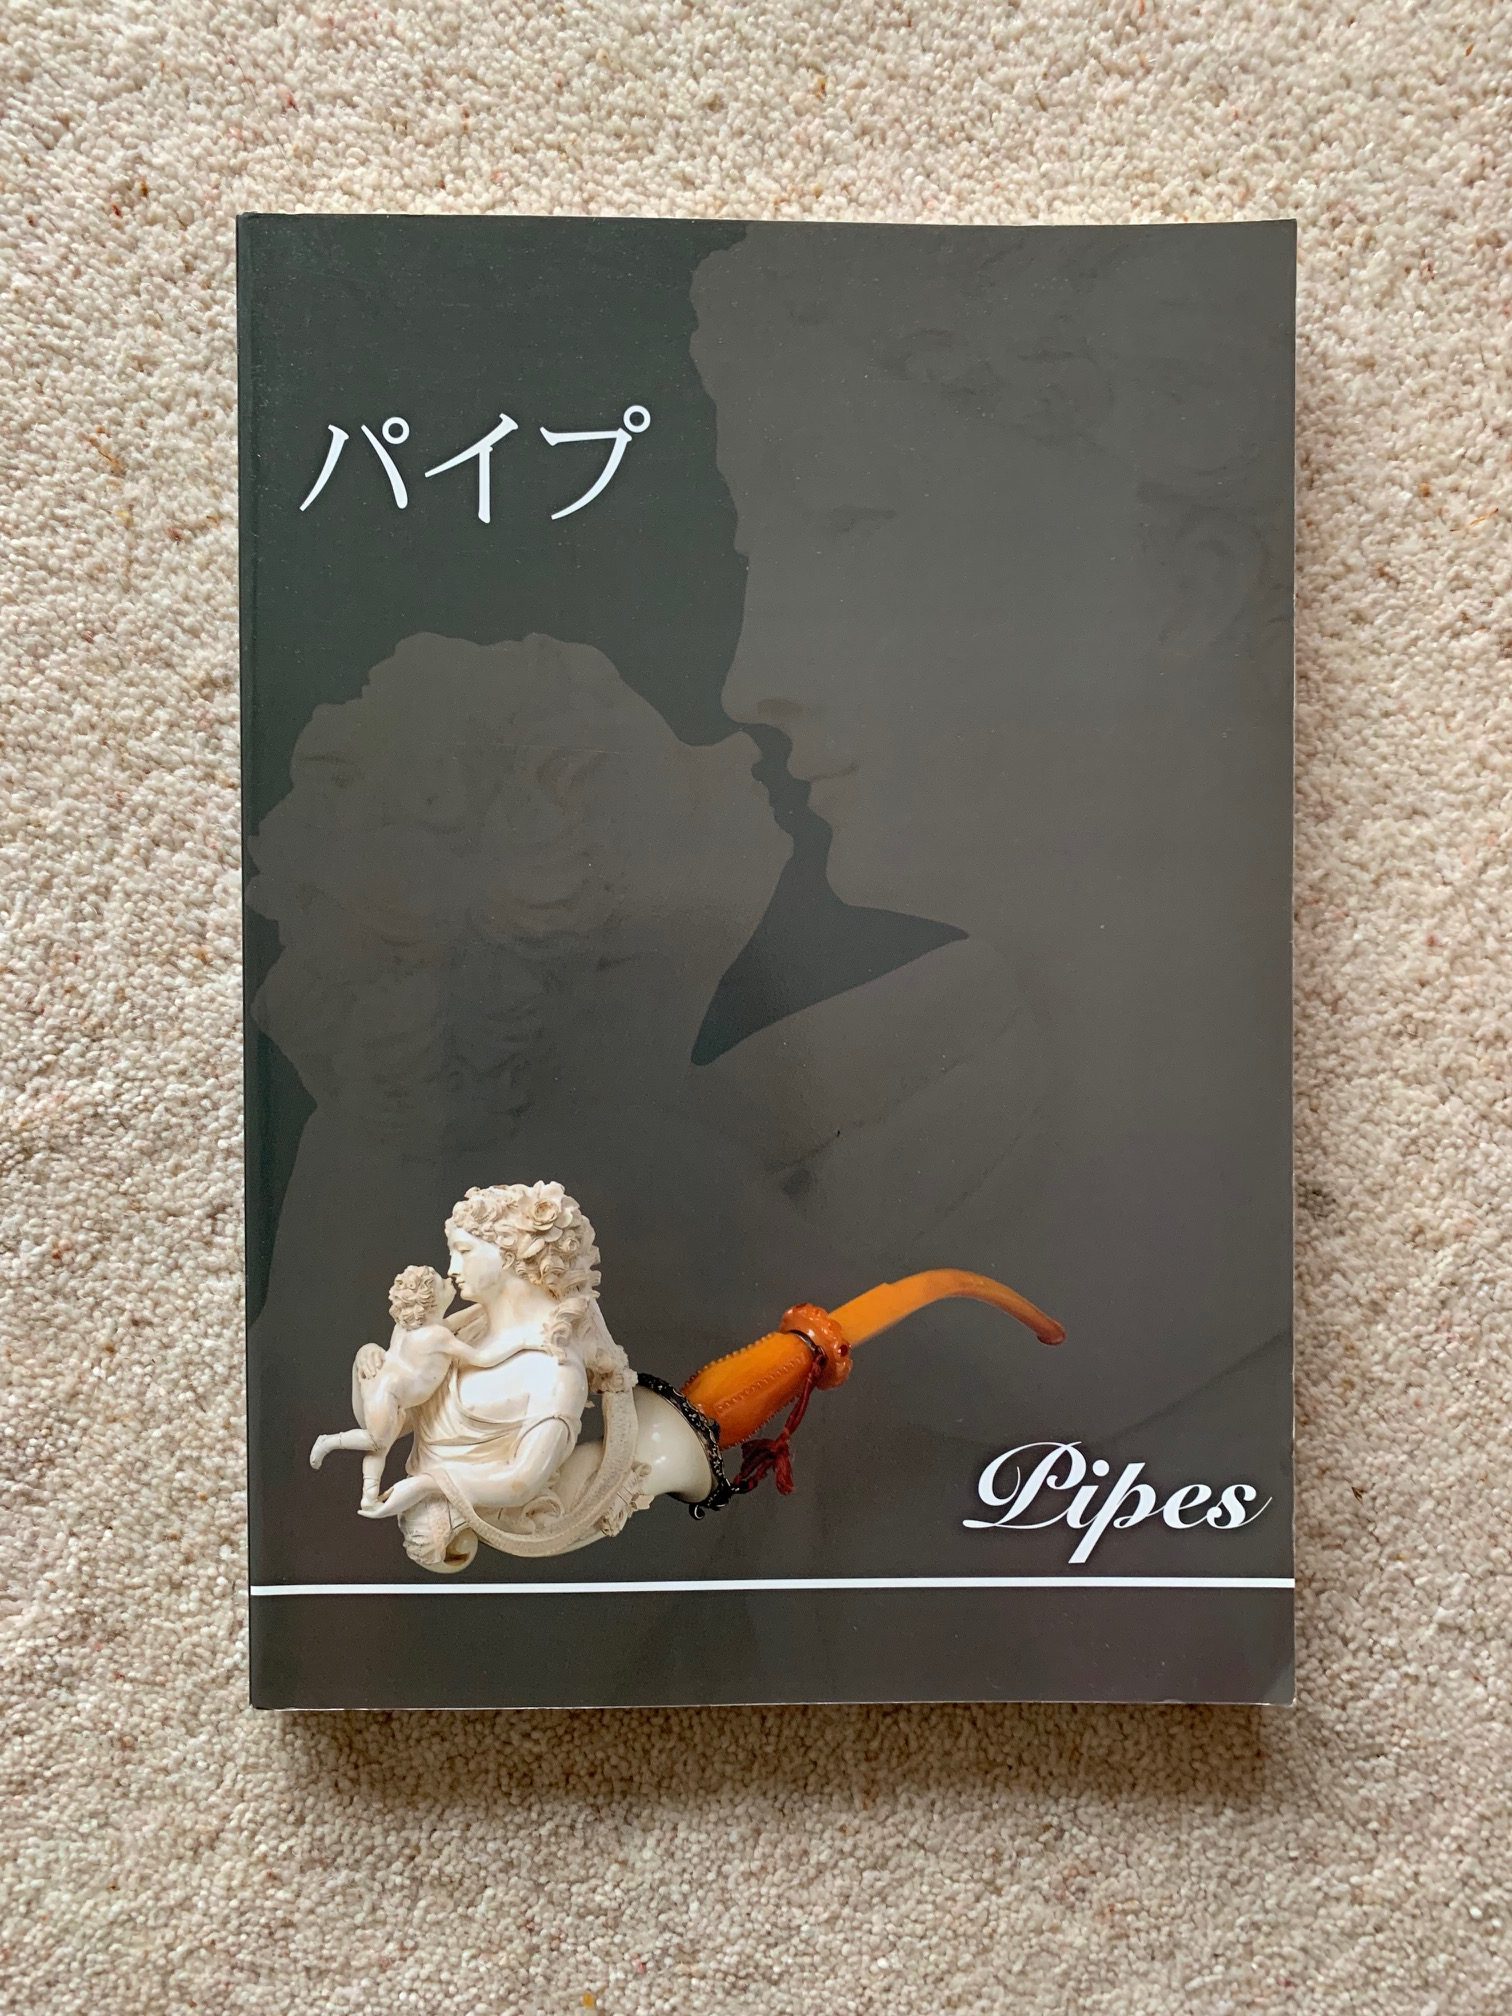 Pipes - Illustrated Pipe Book in Japanesse Image